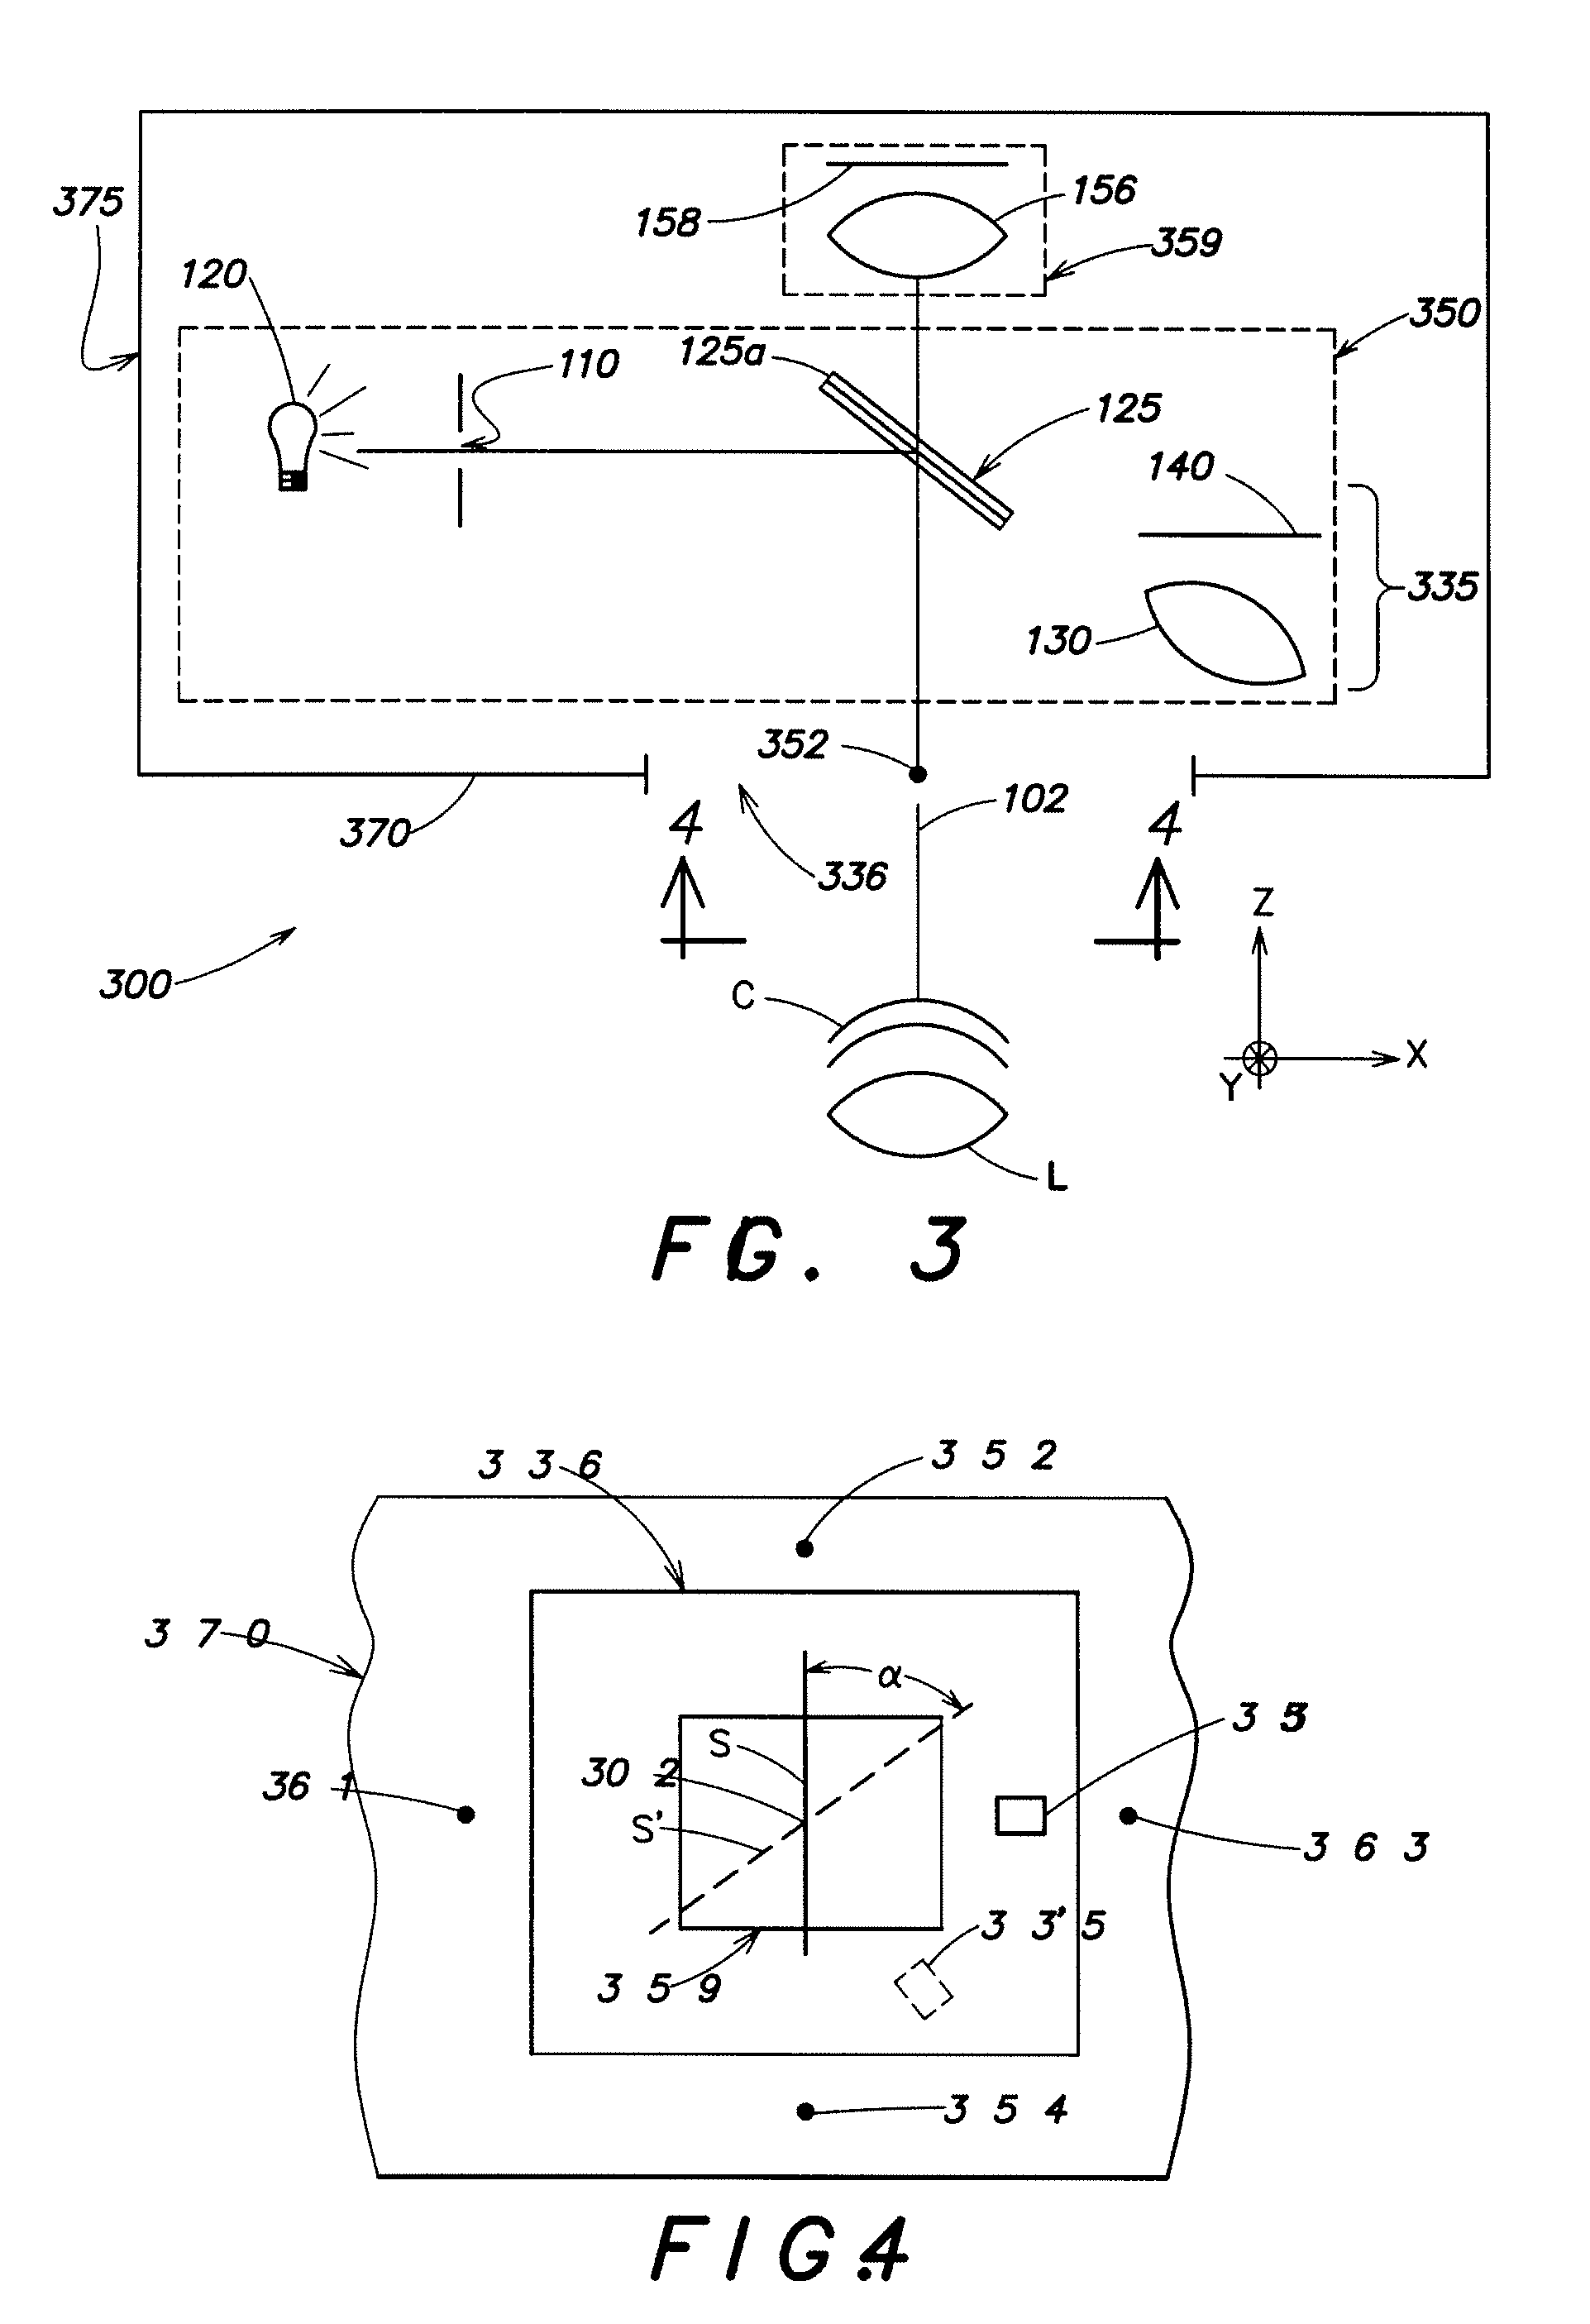 Eye Measurement Apparatus and a Method of Using Same